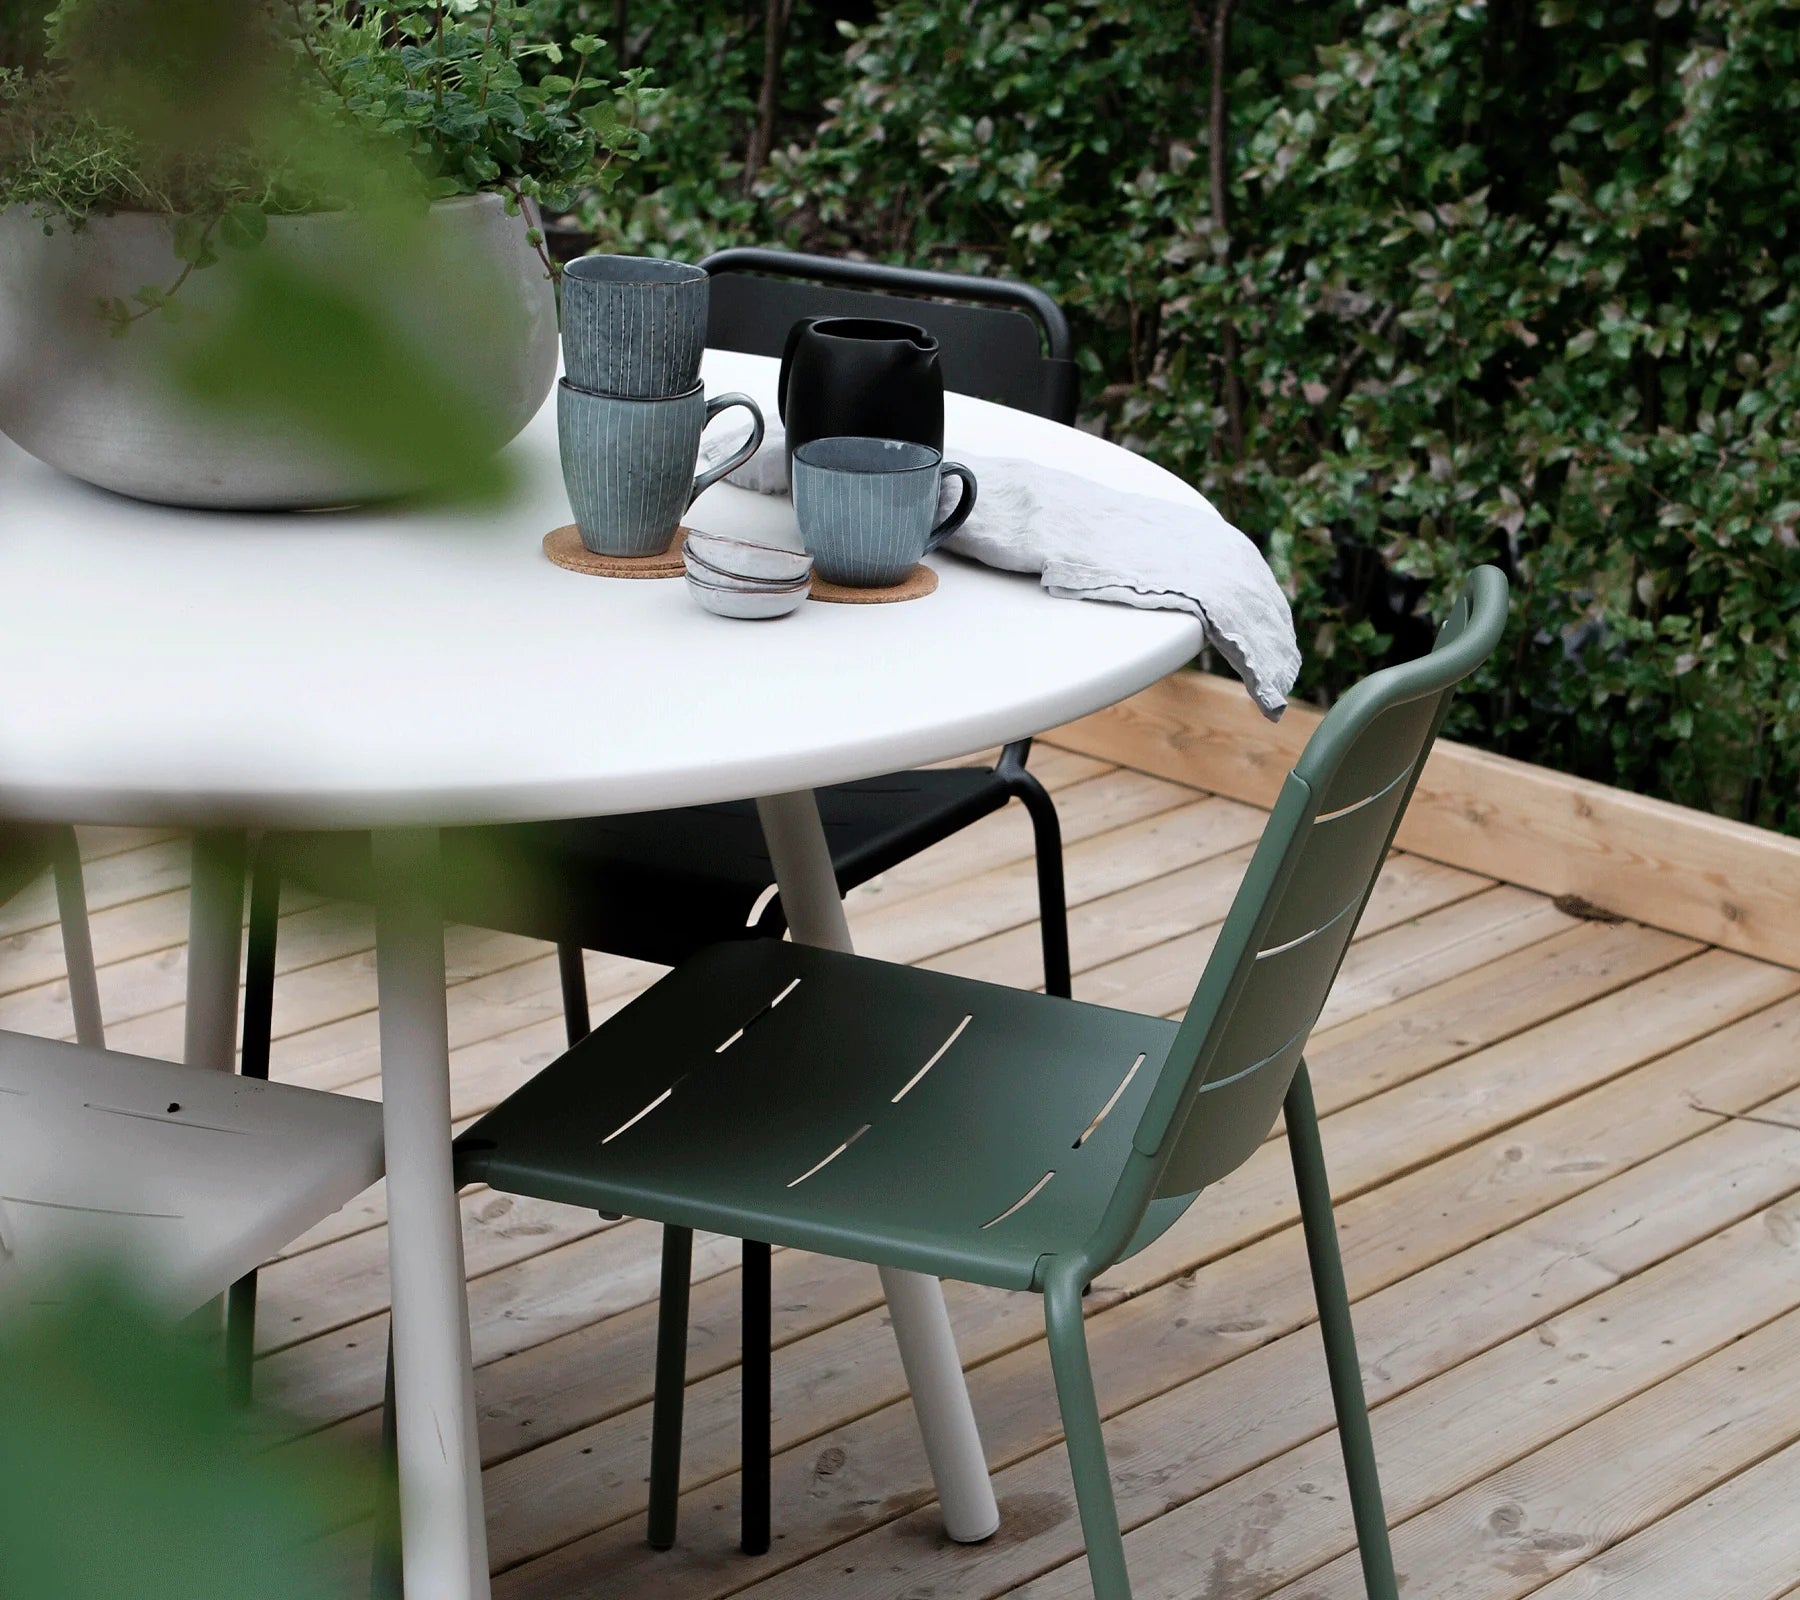 Boxhill's Area Outdoor Aluminum Dining Table White Lifestyle image on wooden platform at the garden with plant and cups on top